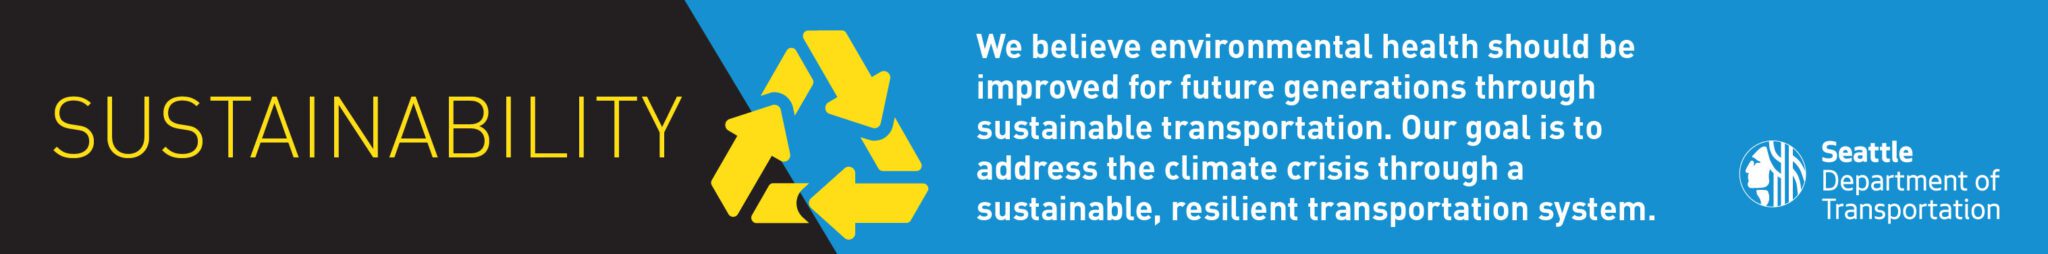 Graphic showing sustainability as a core value and goal. The blue and black image has the word "Sustainability" in large text, with a yellow recycling icon, text describing the value, and the SDOT logo to the right.